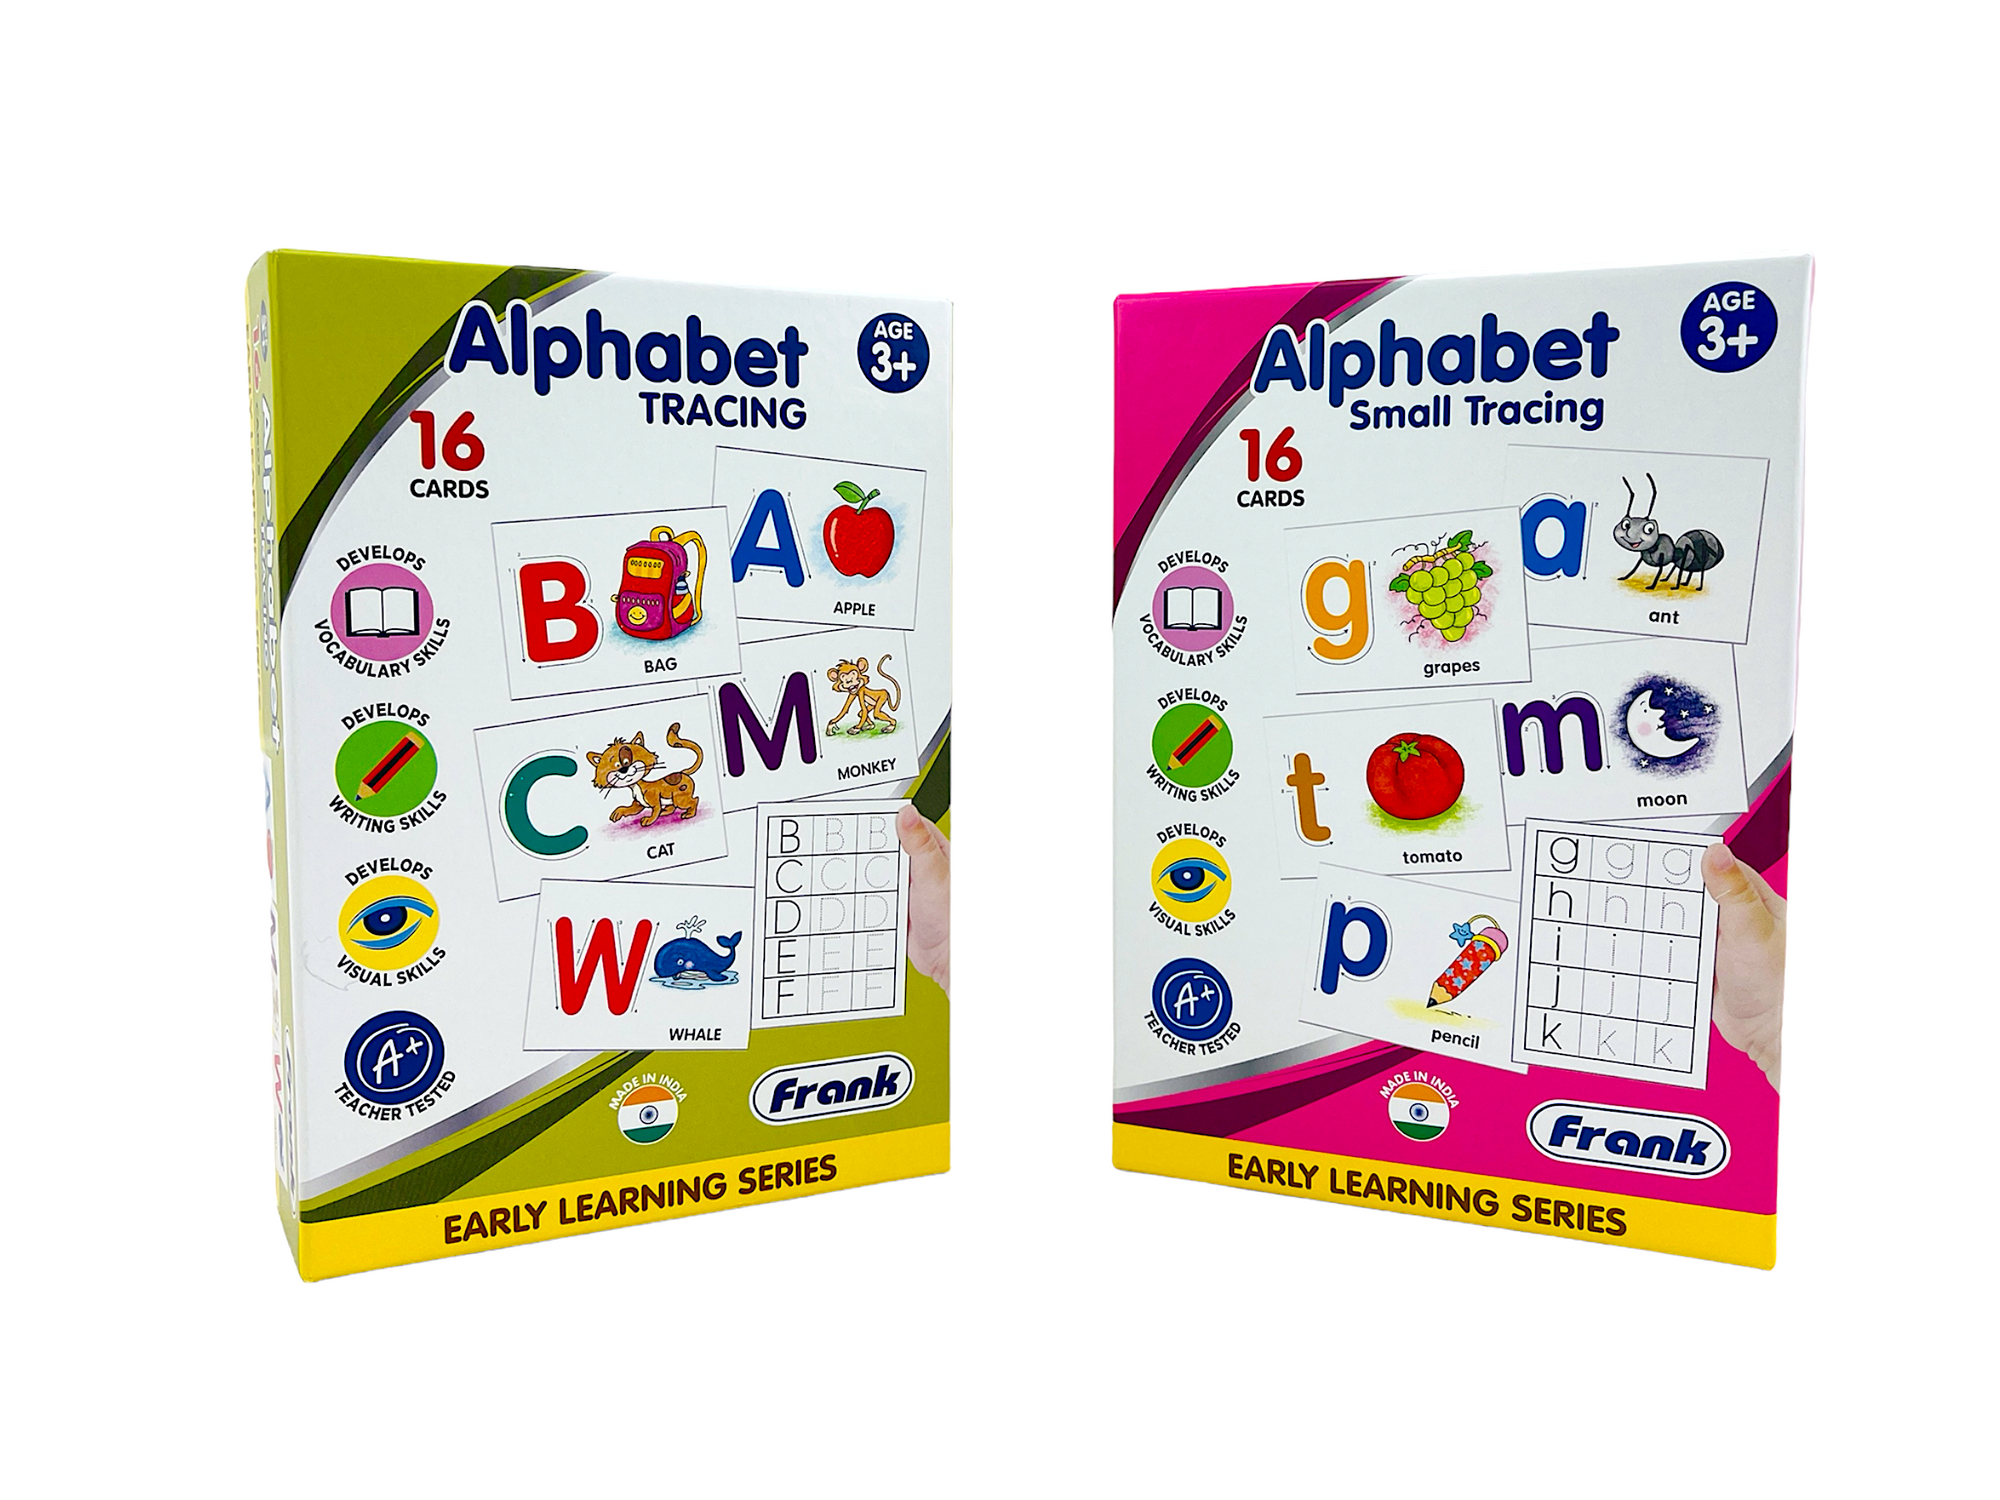 The lower case and upper case Frank - Alphabet Tracing Cards next to each other on a white background